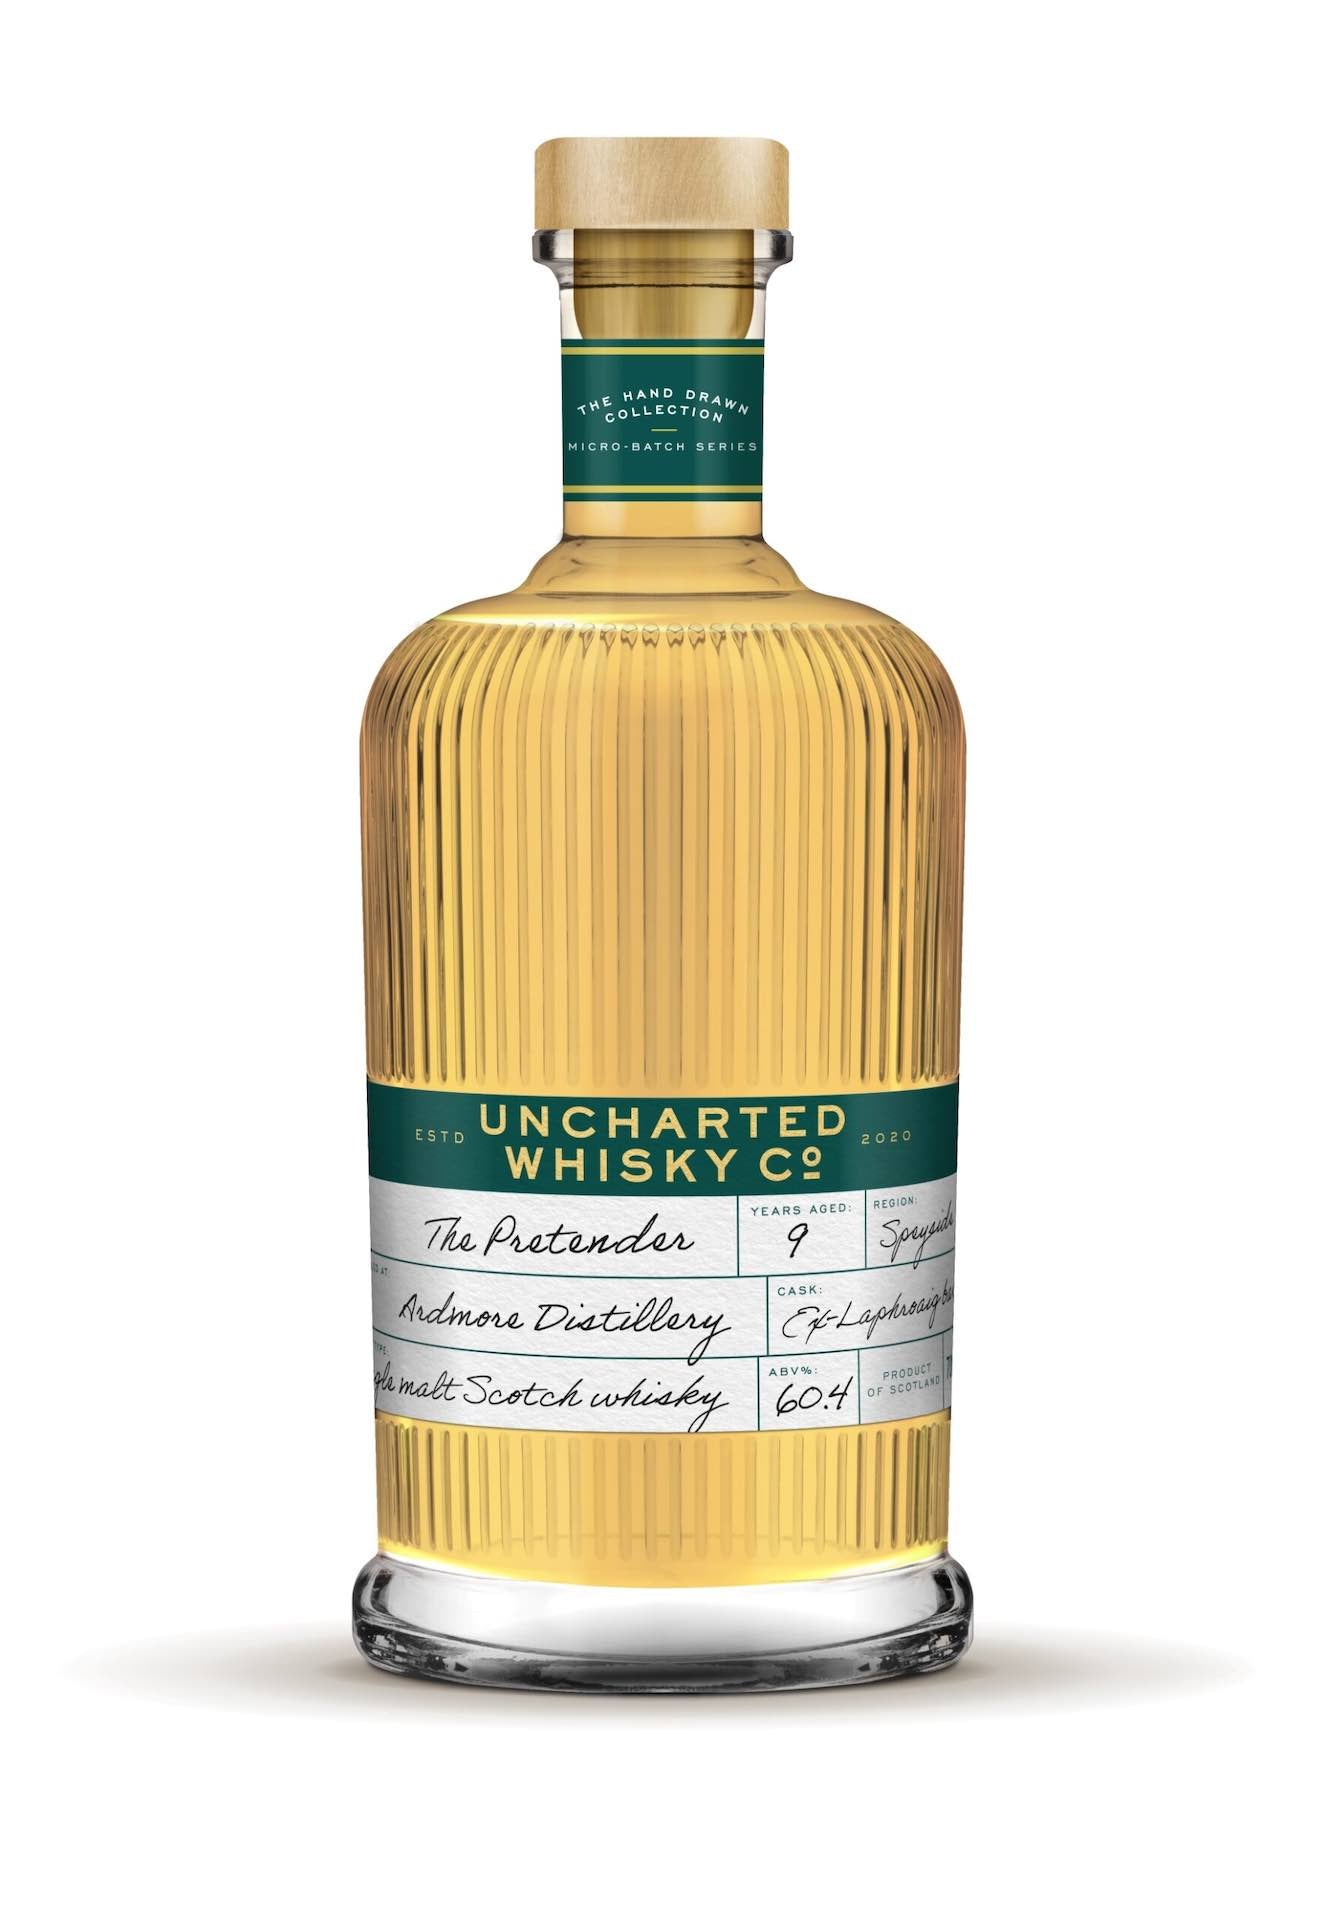 Uncharted Whisky, The Pretender, Ardmore 9 Year Old